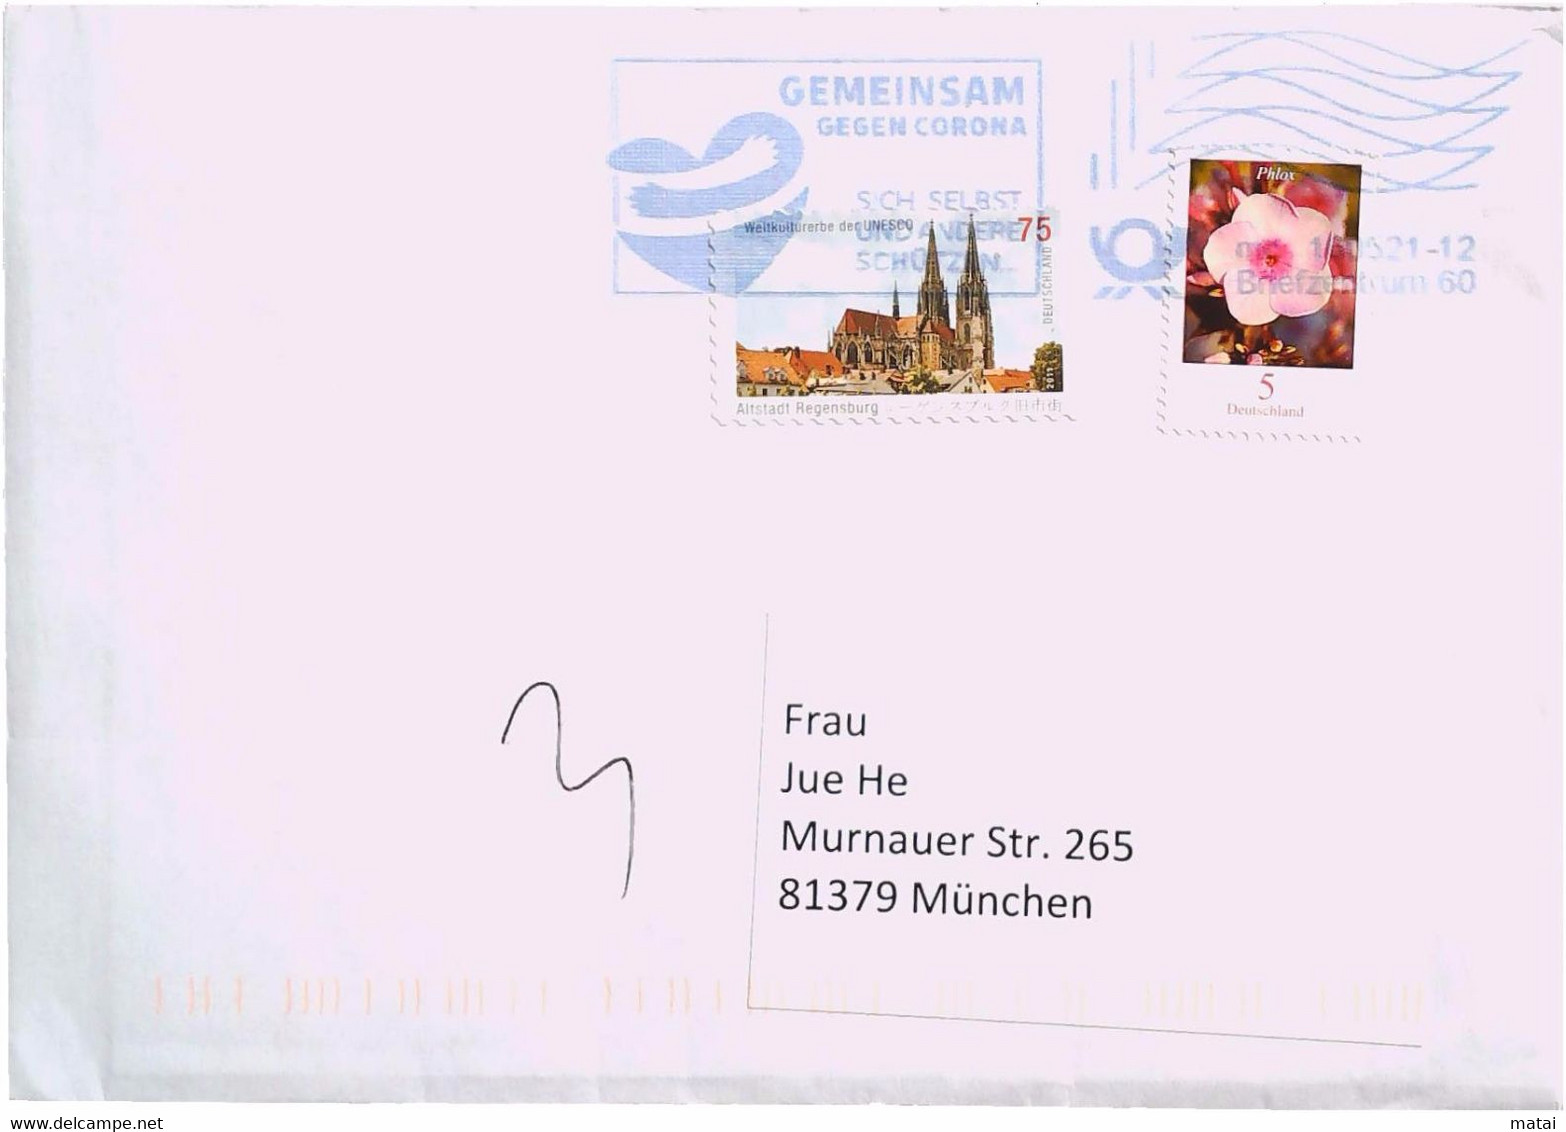 GERMANY COVER WITH  ANTI COVID-19 INFORMATION POSTMARK - Covers & Documents